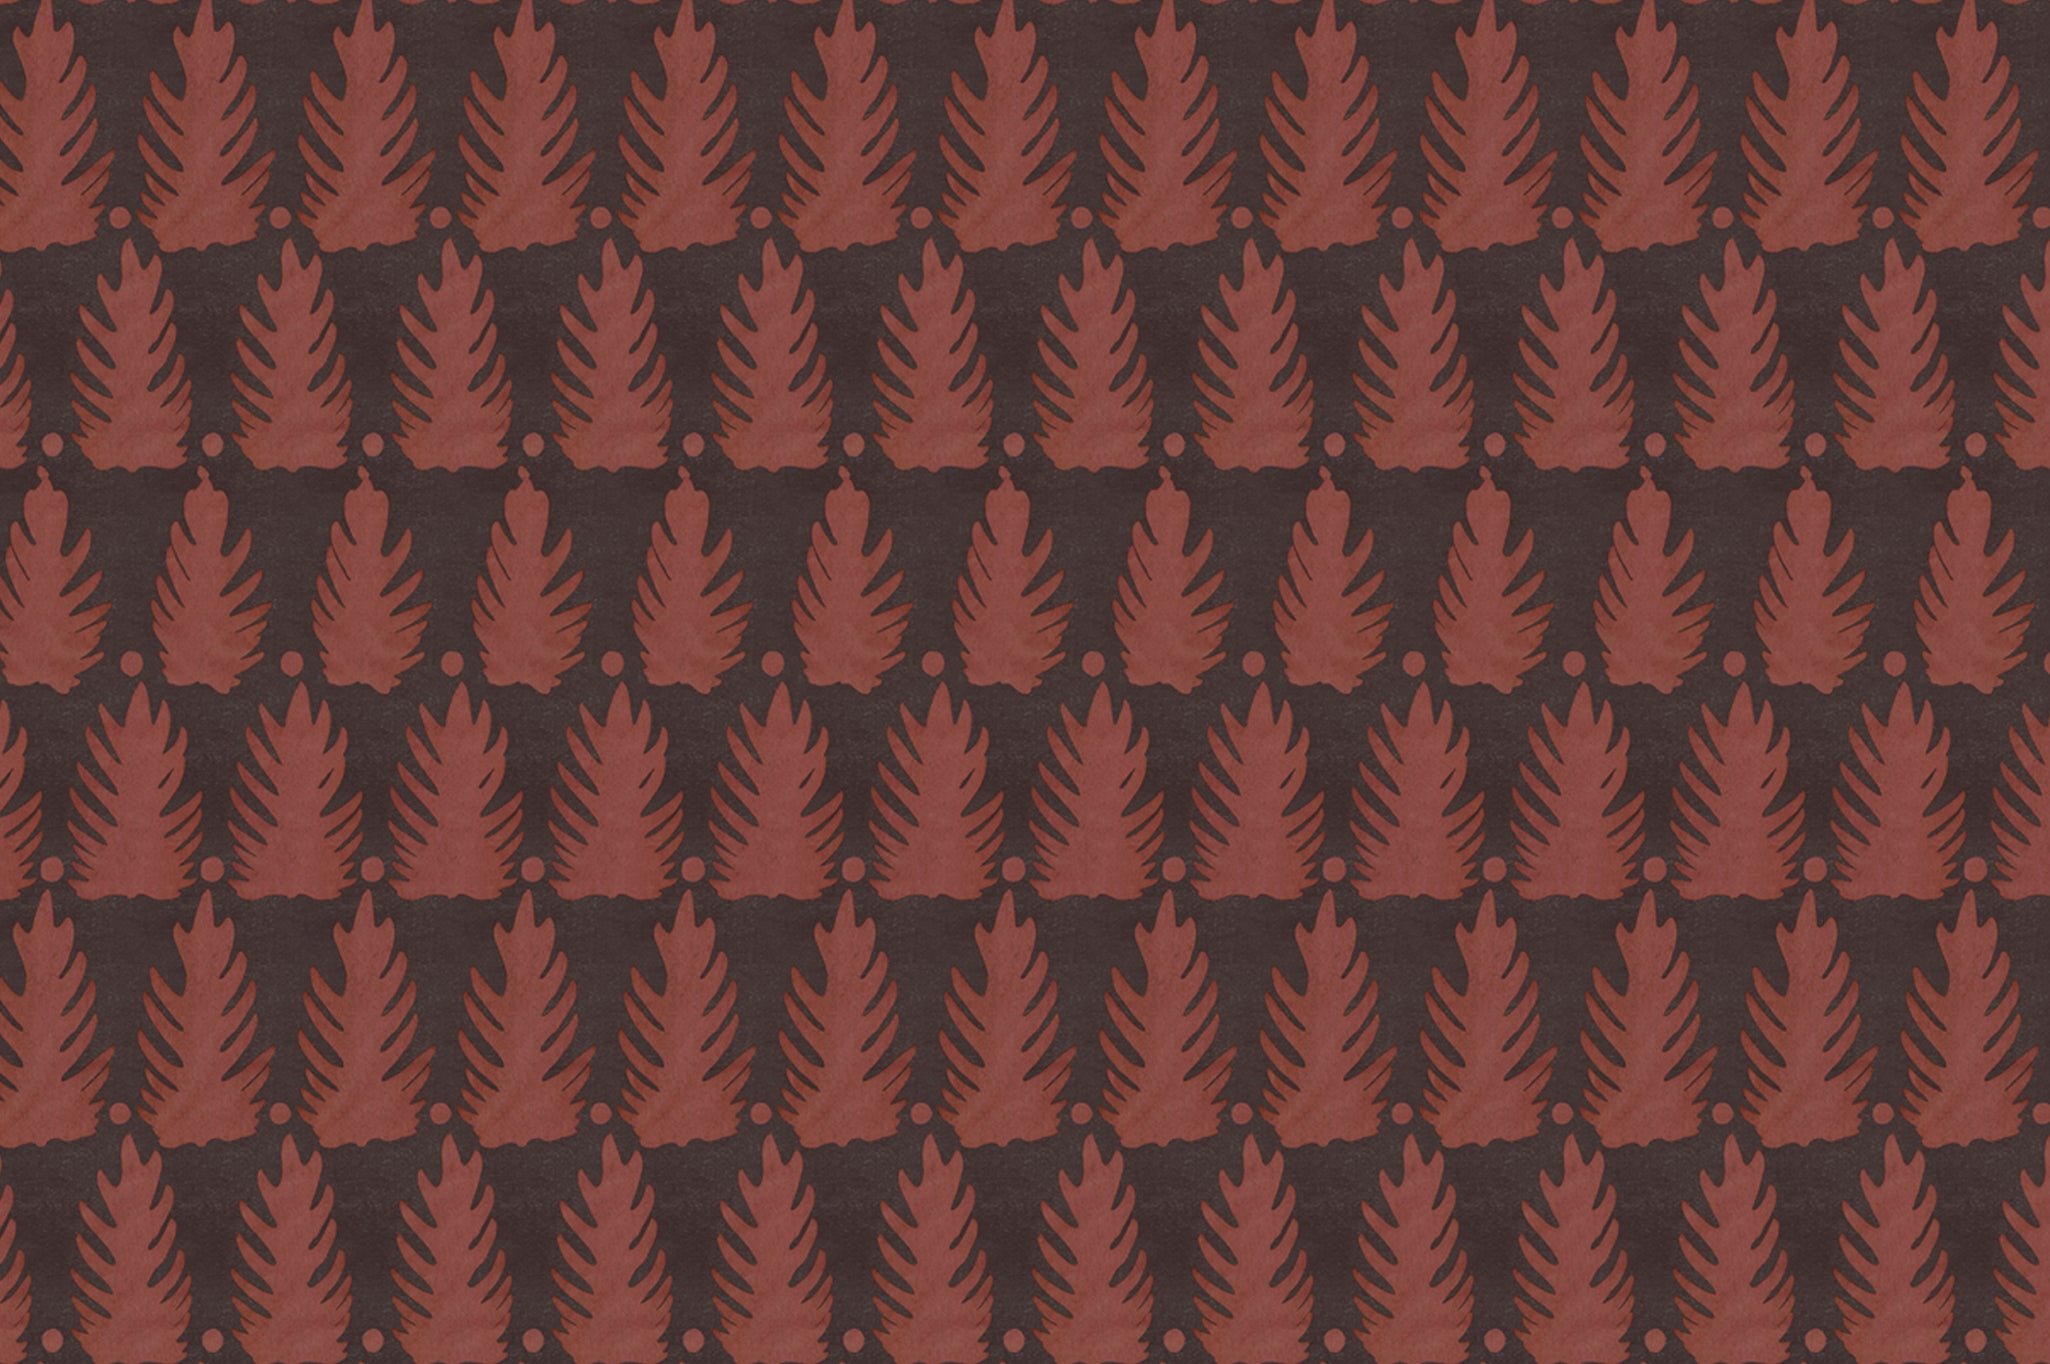 Detail of fabric in a linear leaf print in red on a black field.